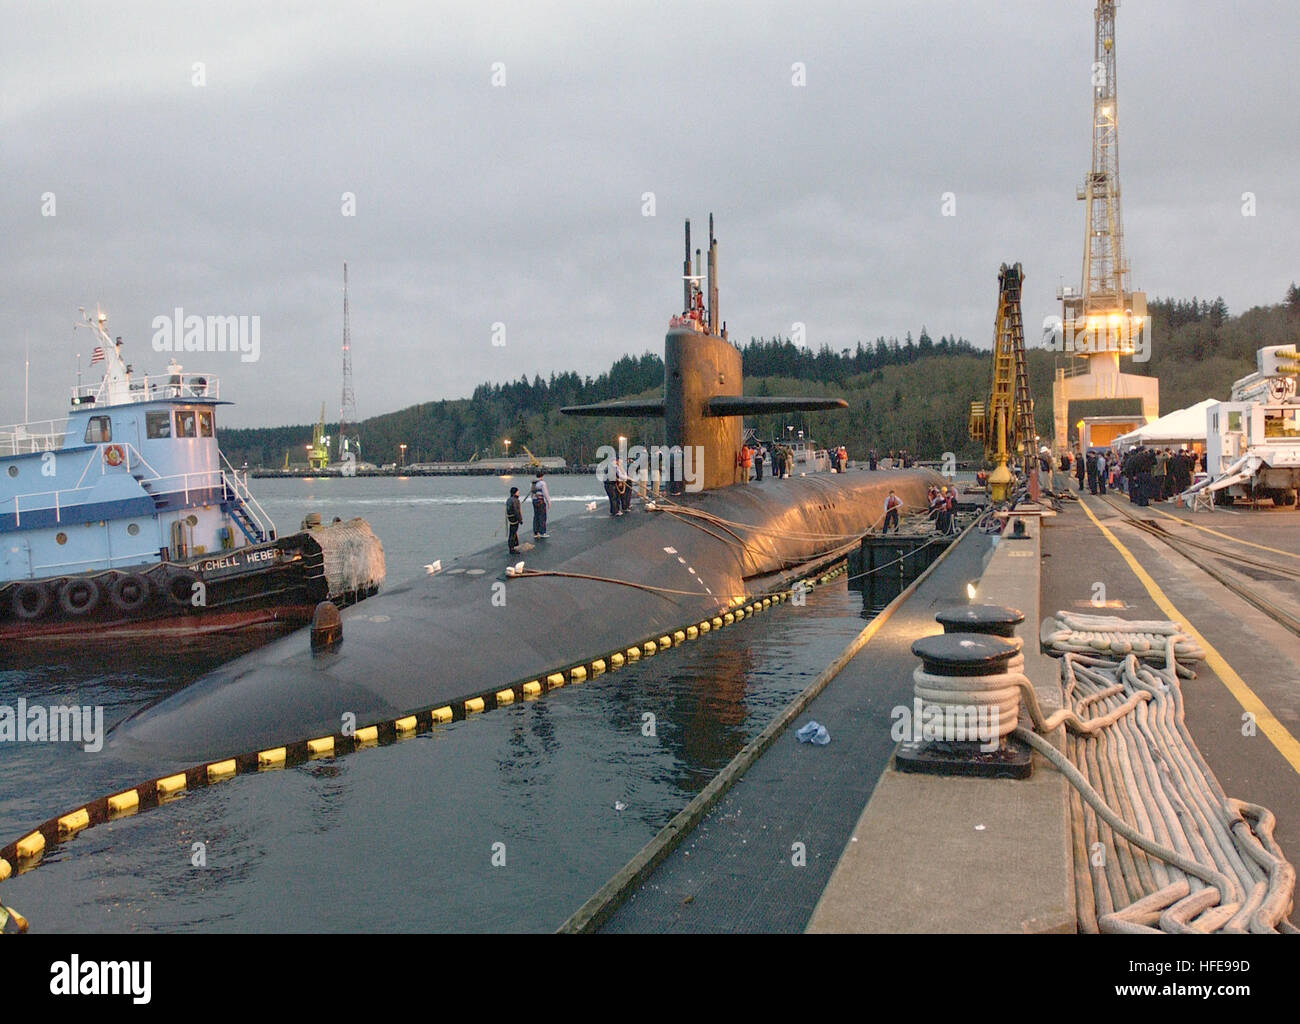 021122-N-6497N-006 Naval Submarine Base, Bangor Wash. (Nov. 22, 2002) -- The crew of the USS Kentucky (SSBN 737) arrives at their new homeport for the first time as the boat is guided in to the Delta Pier. U.S. Navy photo by Brian Nokell.  (RELEASED) US Navy 021122-N-6497N-006 USS Kentucky (SSBN 737) arrives at their new homeport Stock Photo